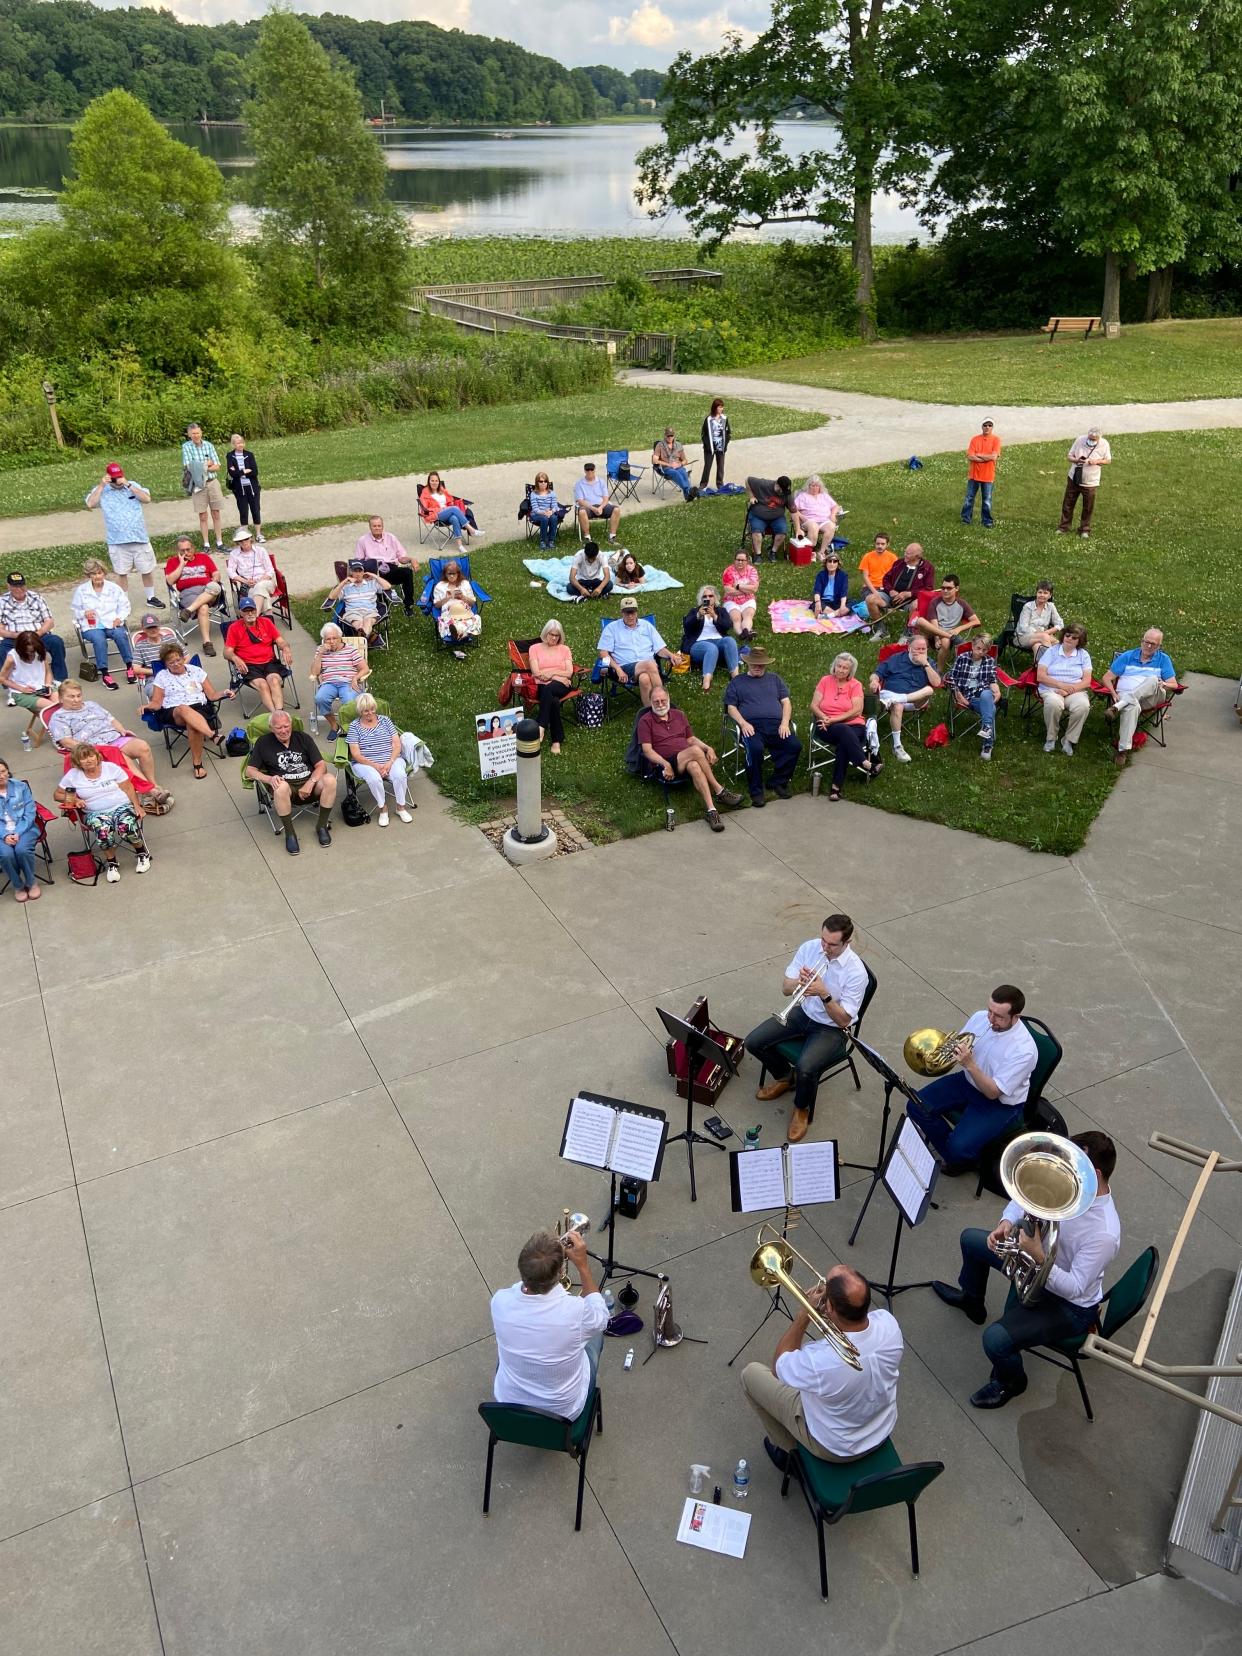 A brass quintet from the Canton Symphony Orchestra will perform at 6 p.m. Sunday in Duncan Plaza as part of Massillon' ice cream social. The event includes free ice cream and artwork from the Massillon Community Arts Council.